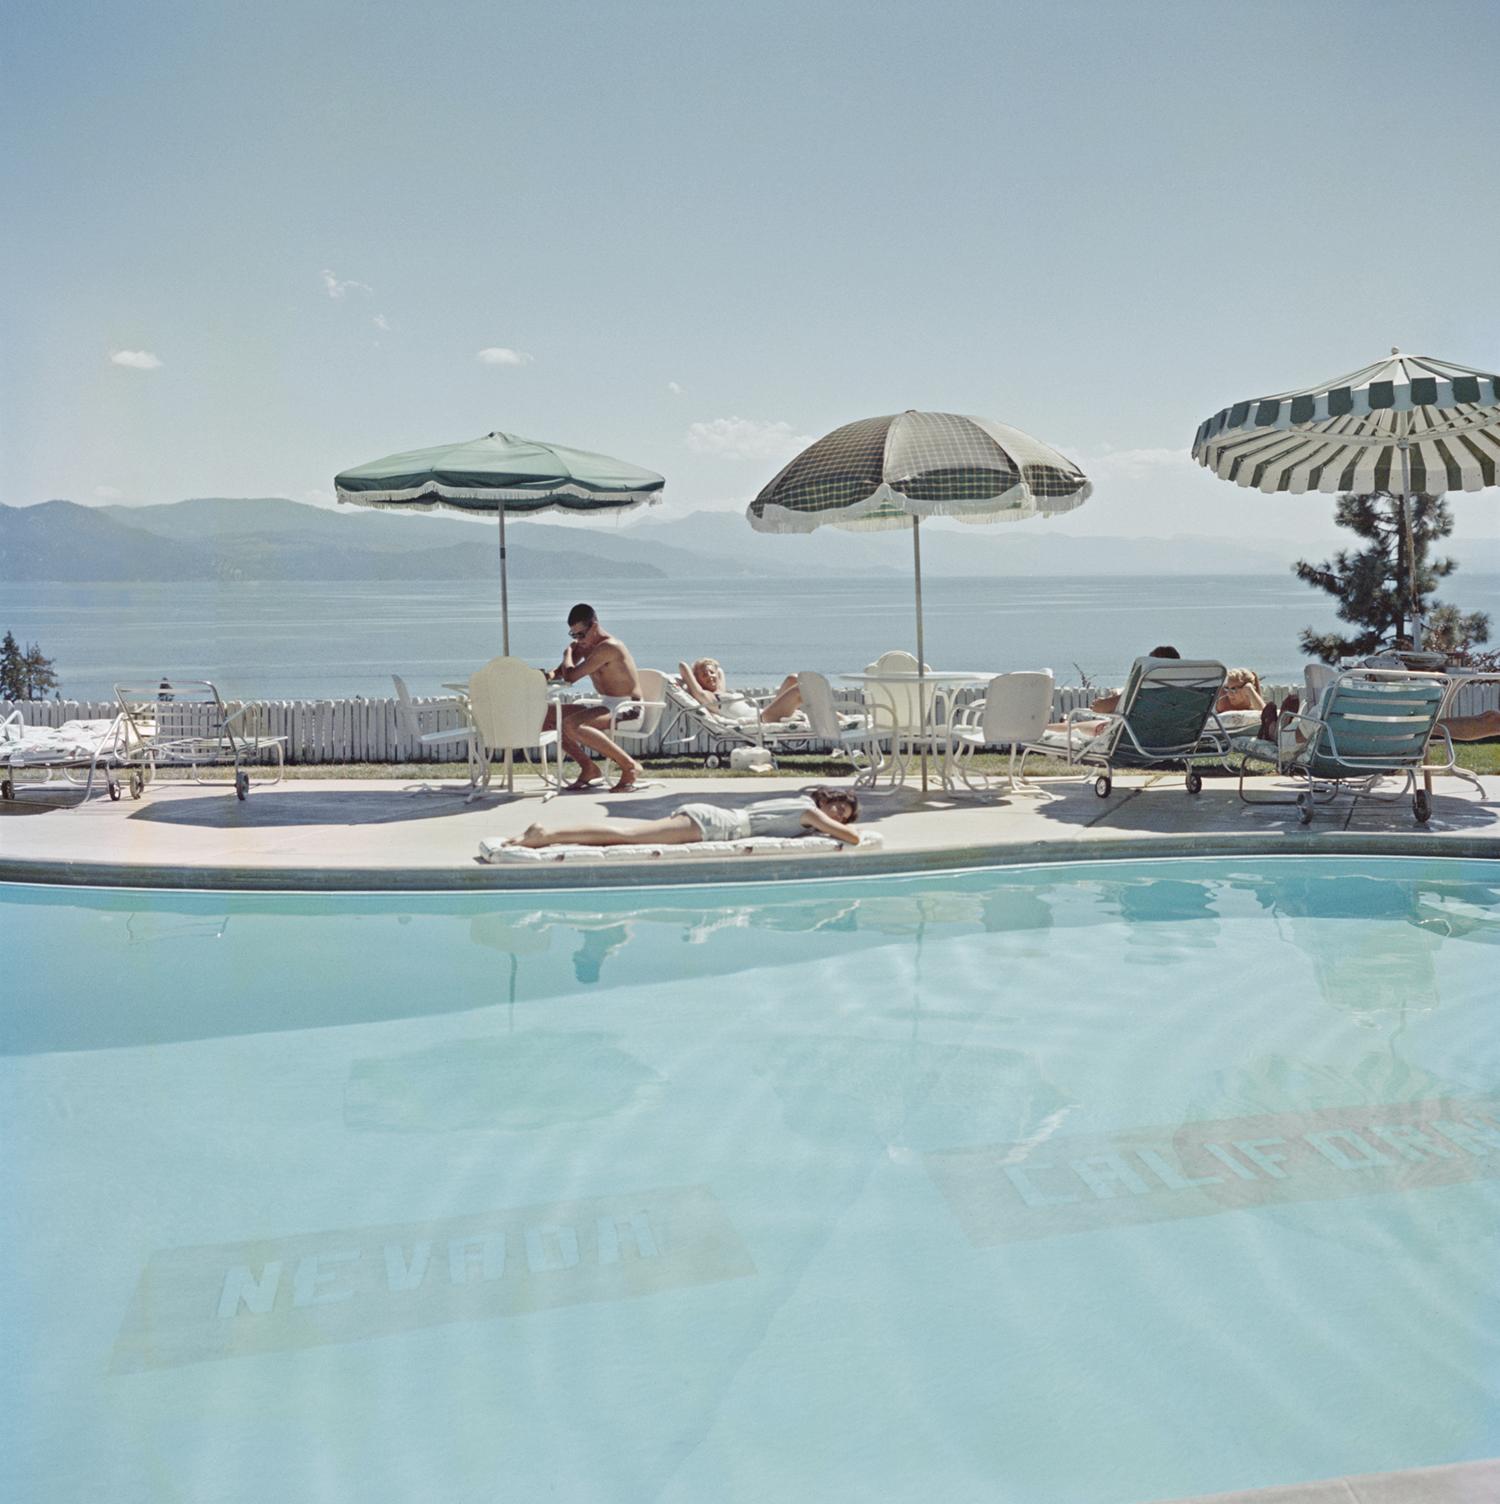 ' STATE LINE ' 1959 by Slim Aarons

ESTATE EDITION -

numbered and emboss stamped on front. (edition size 150 only)


State Line
A swimming pool at the Cal Neva Lodge on the shore of Lake Tahoe, 1959. The Cal Neva Lodge straddles the border between